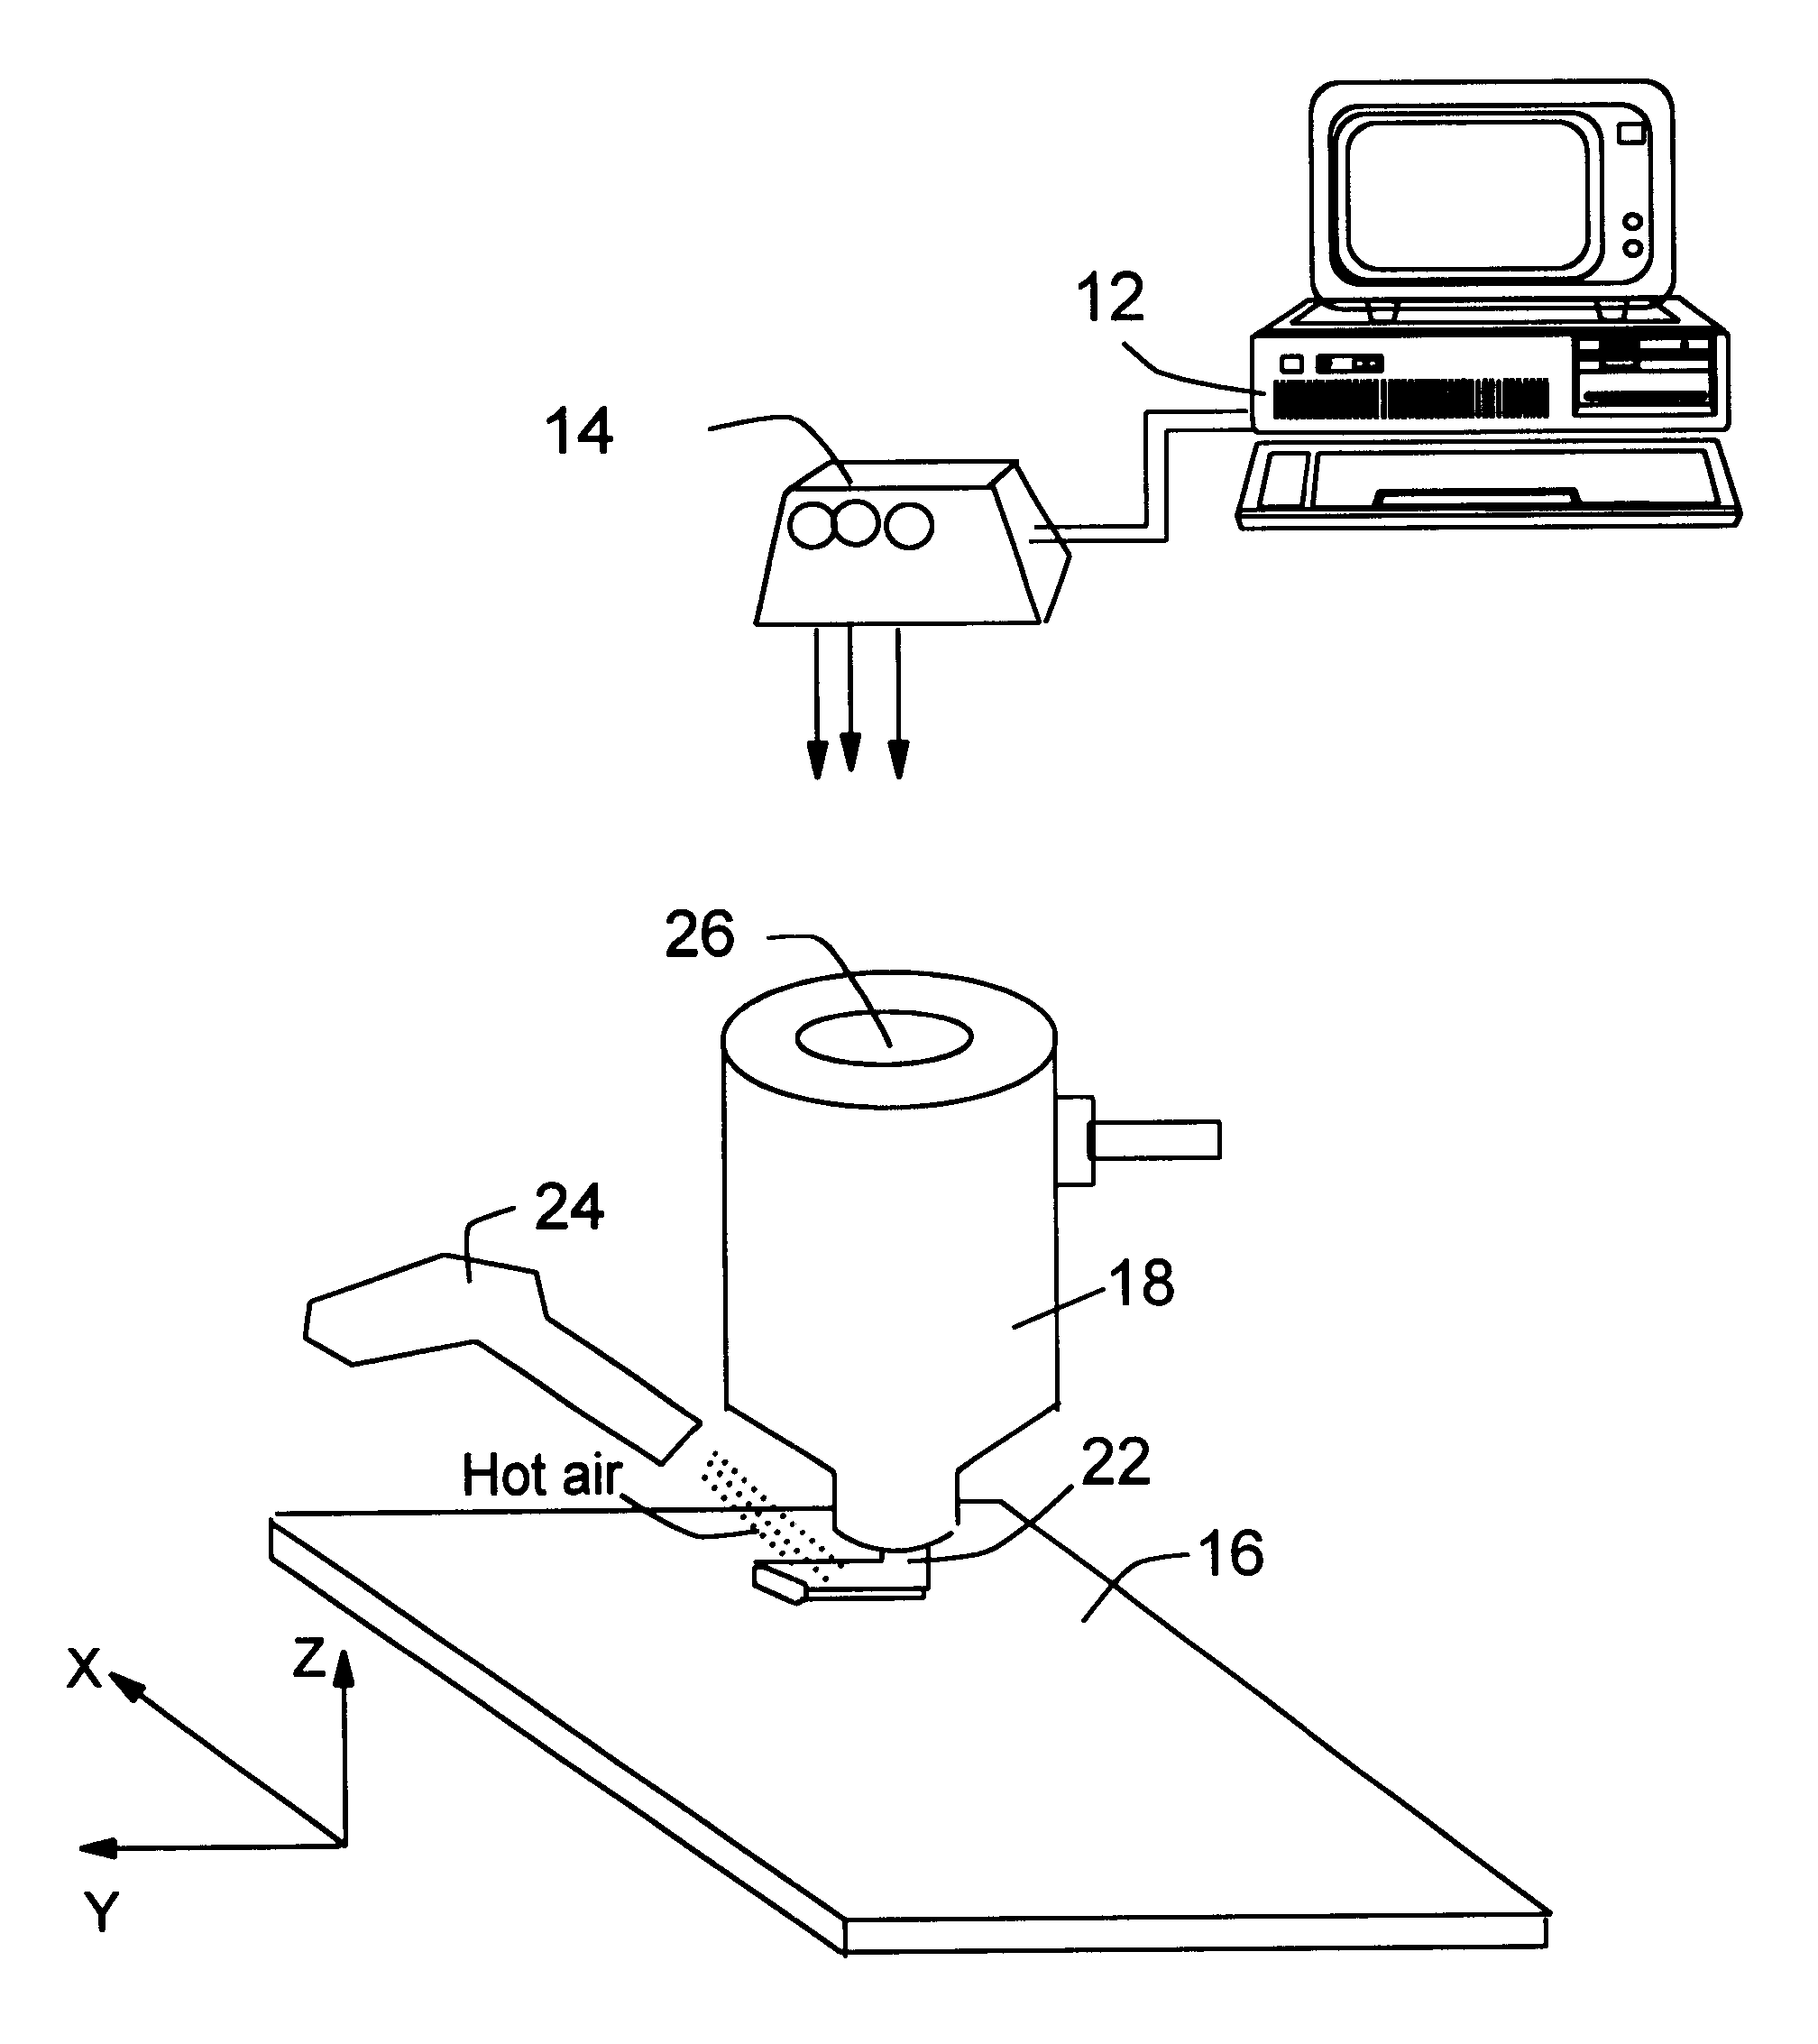 Method for rapidly making a 3-D food object